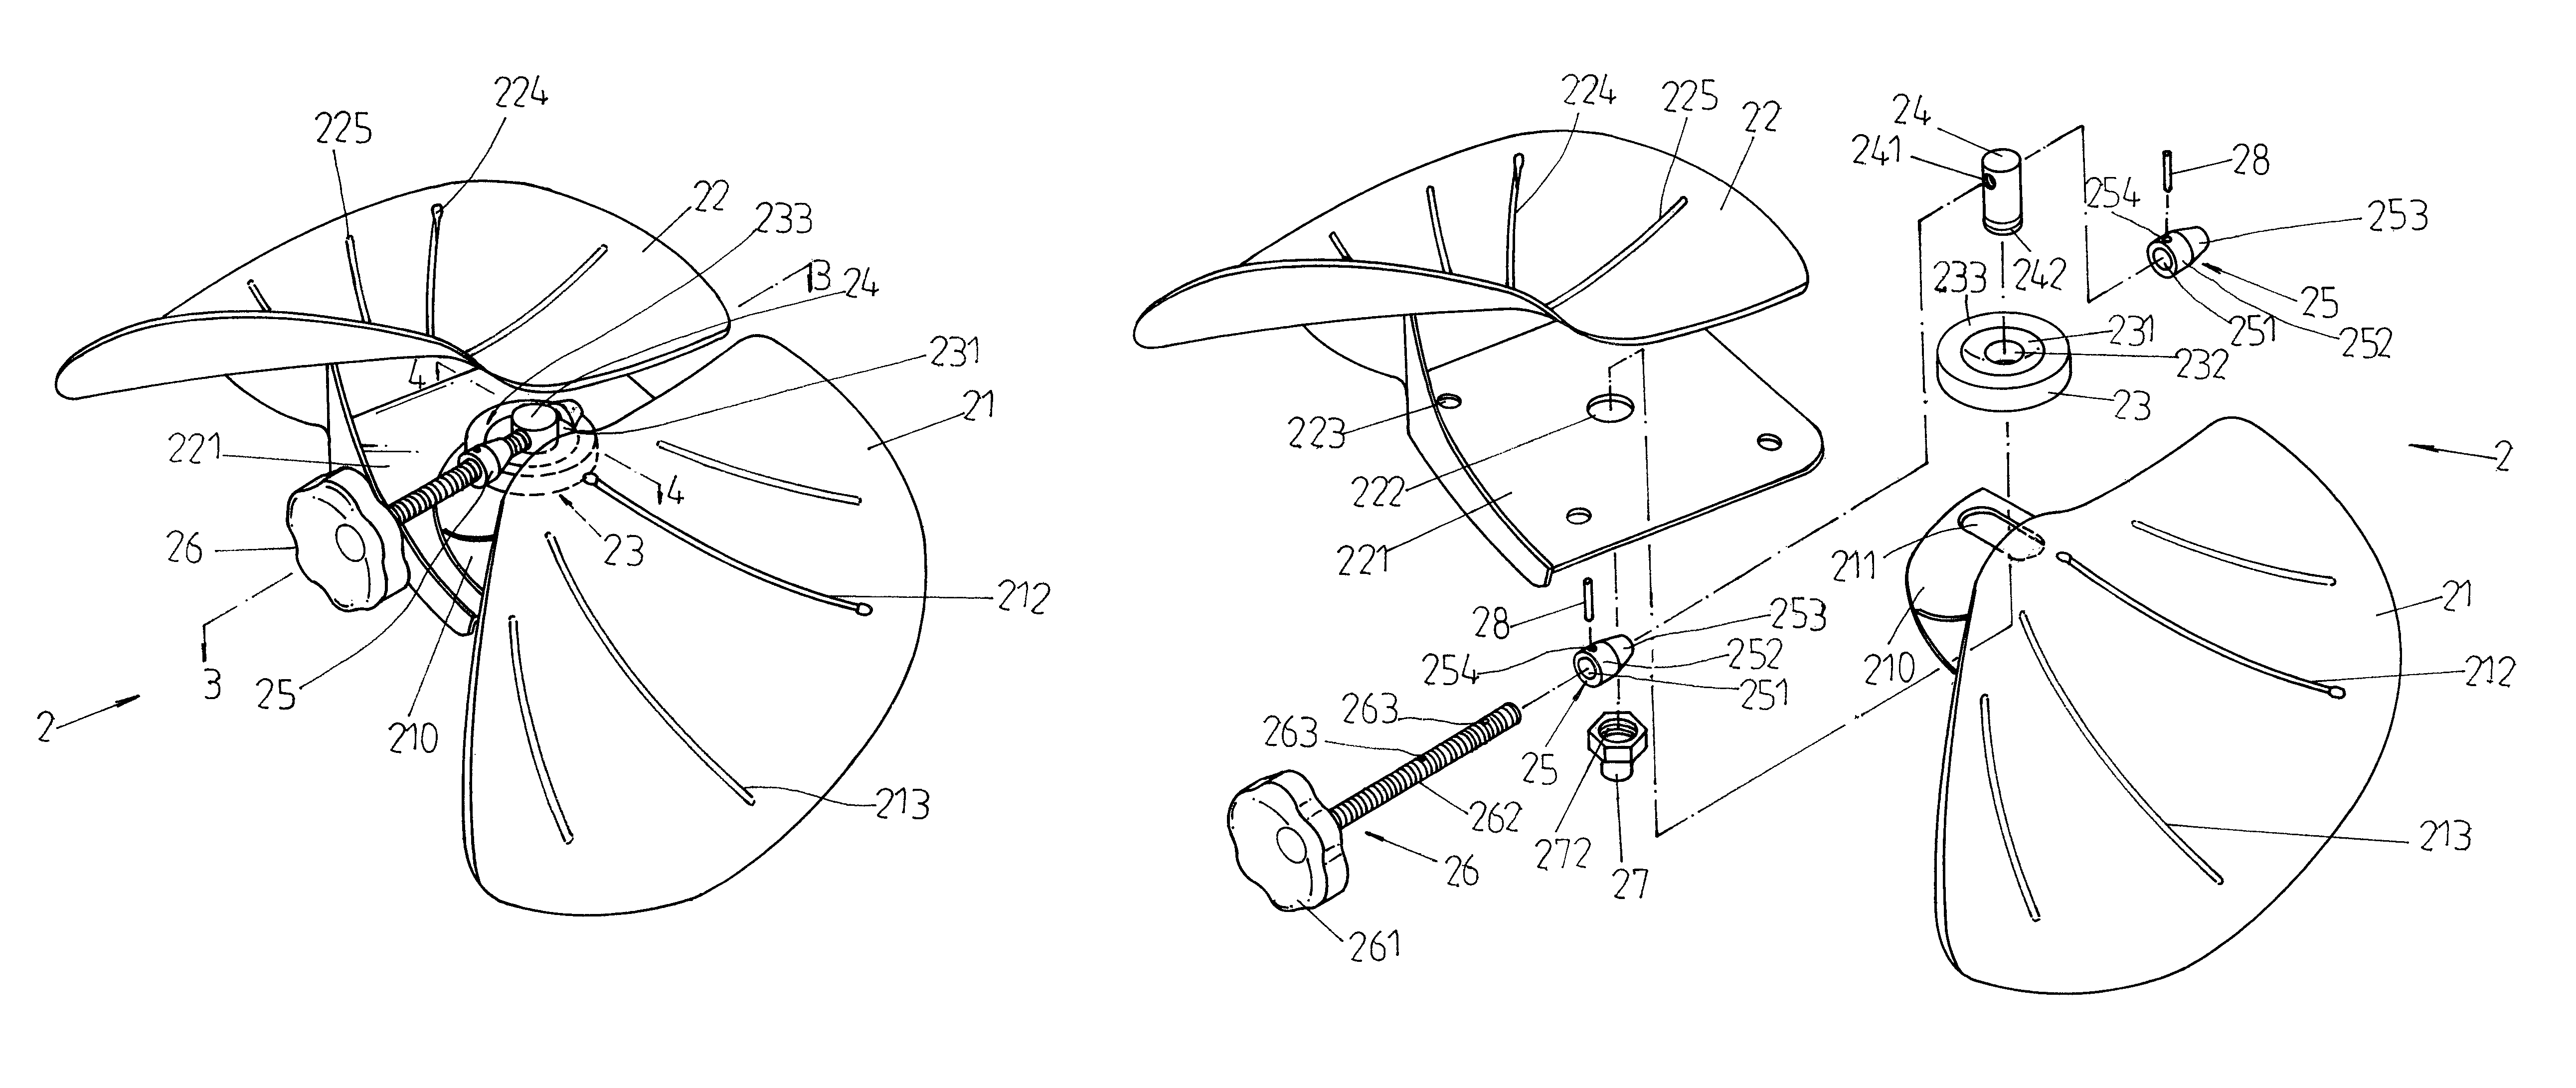 Seat having a saddle shape to fit a user ergonomically